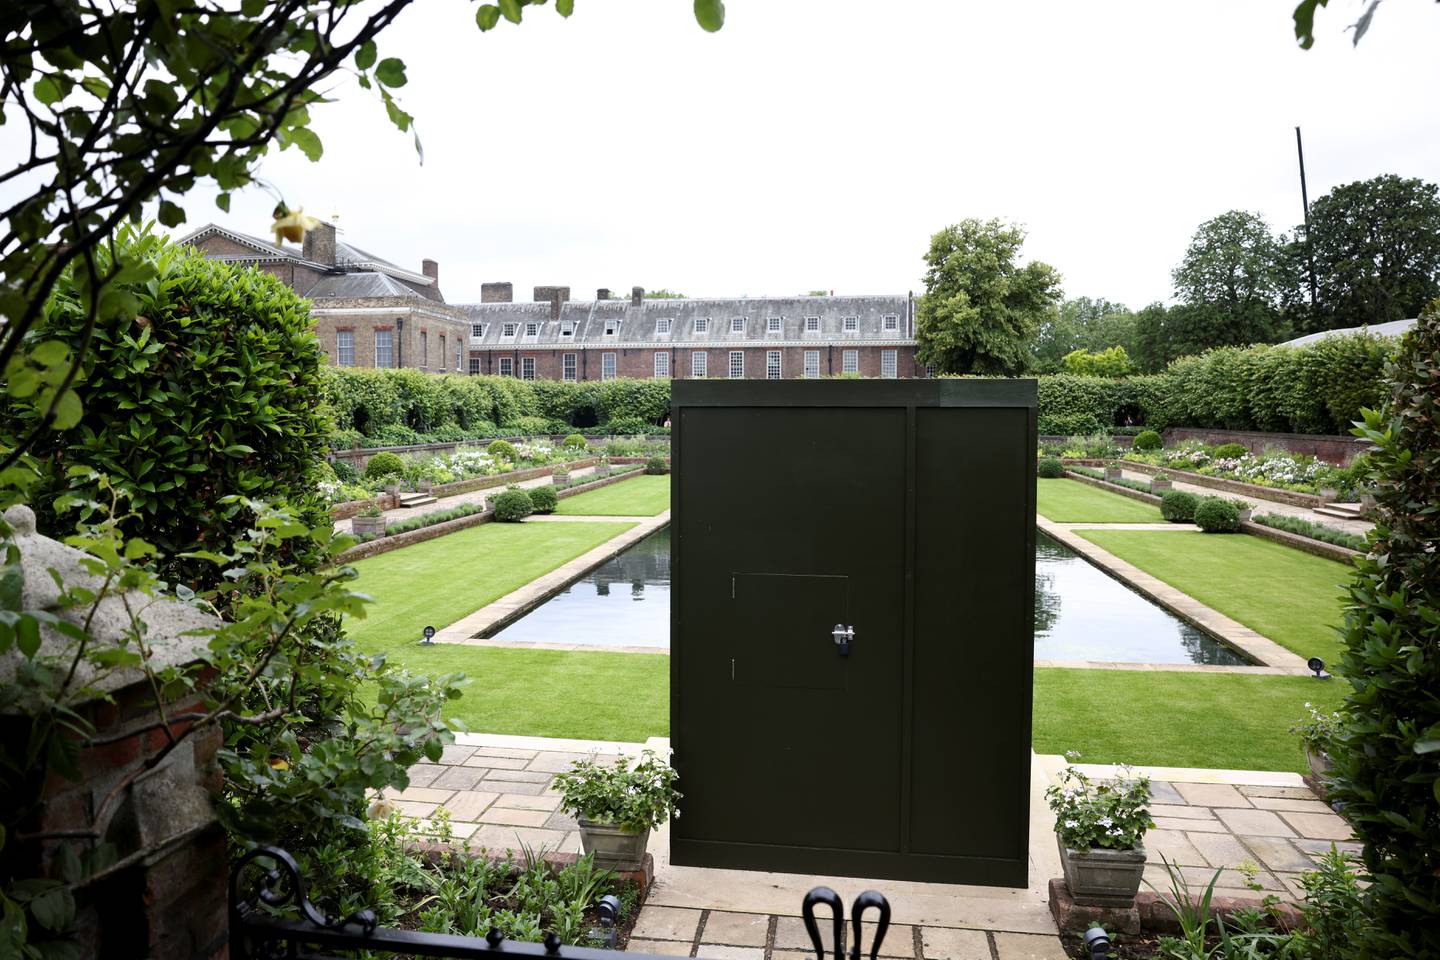 A box covering the statue in place at the Sunken Garden in Kensington Palace ahead of its unveiling on Thursday. Reuters 